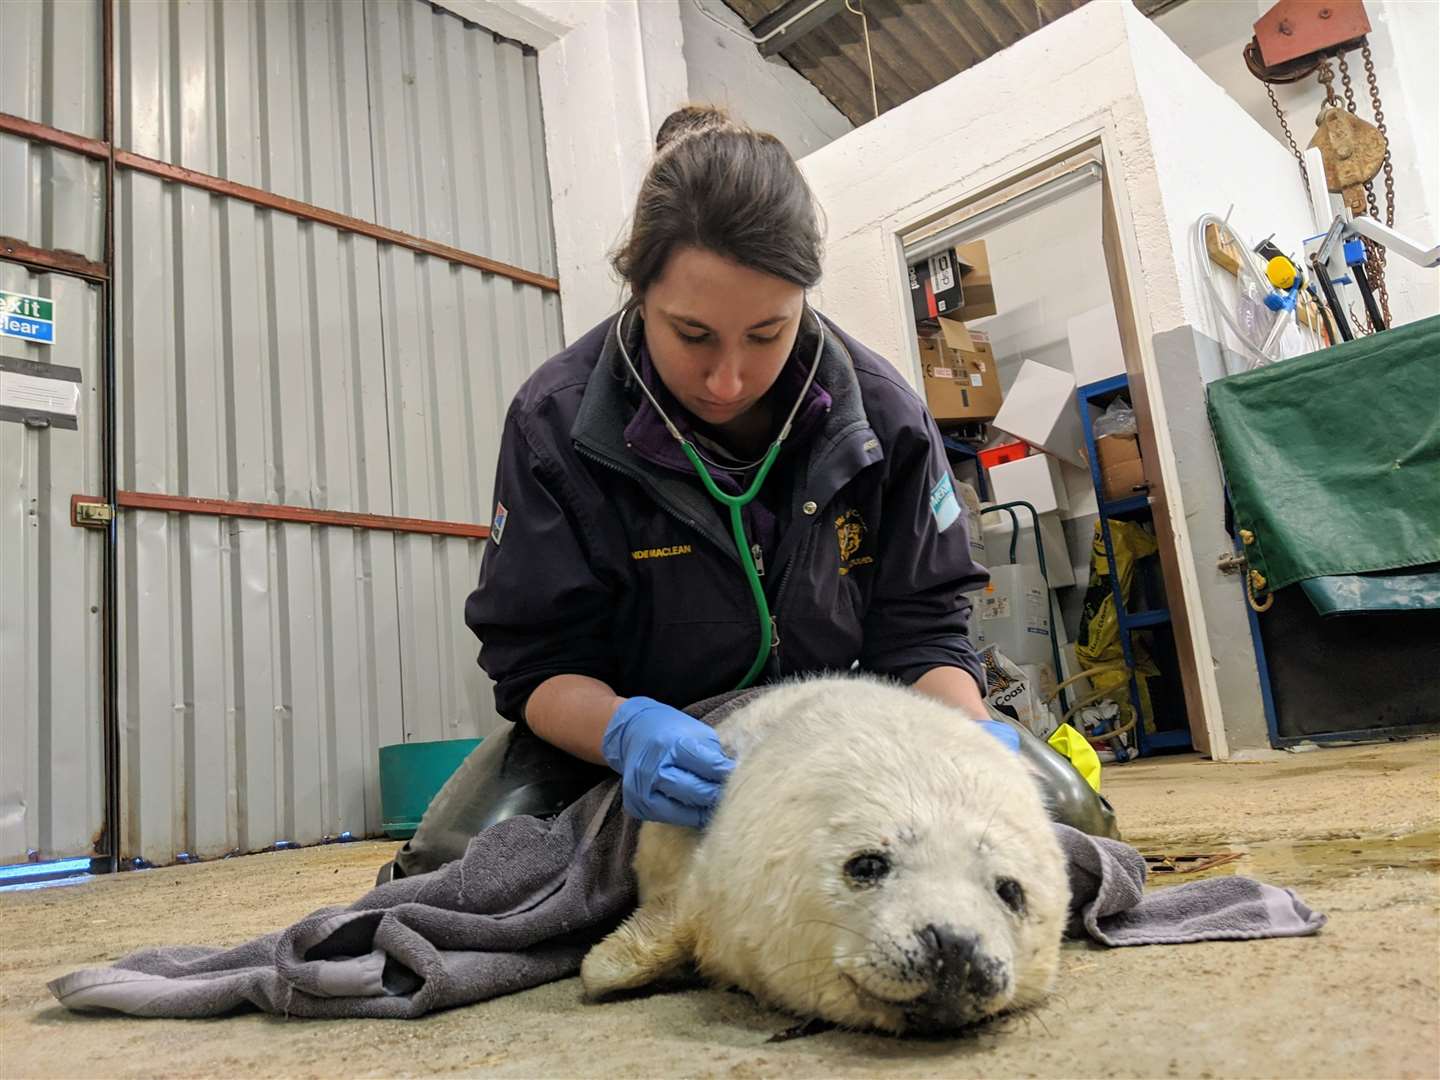 Vet Shondie Maclean treats a seal pup called Pudding in the next episode of The Highland Vet (Monday, 9pm, 5Select). Picture: Daisybeck Studios / 5Select / MCG